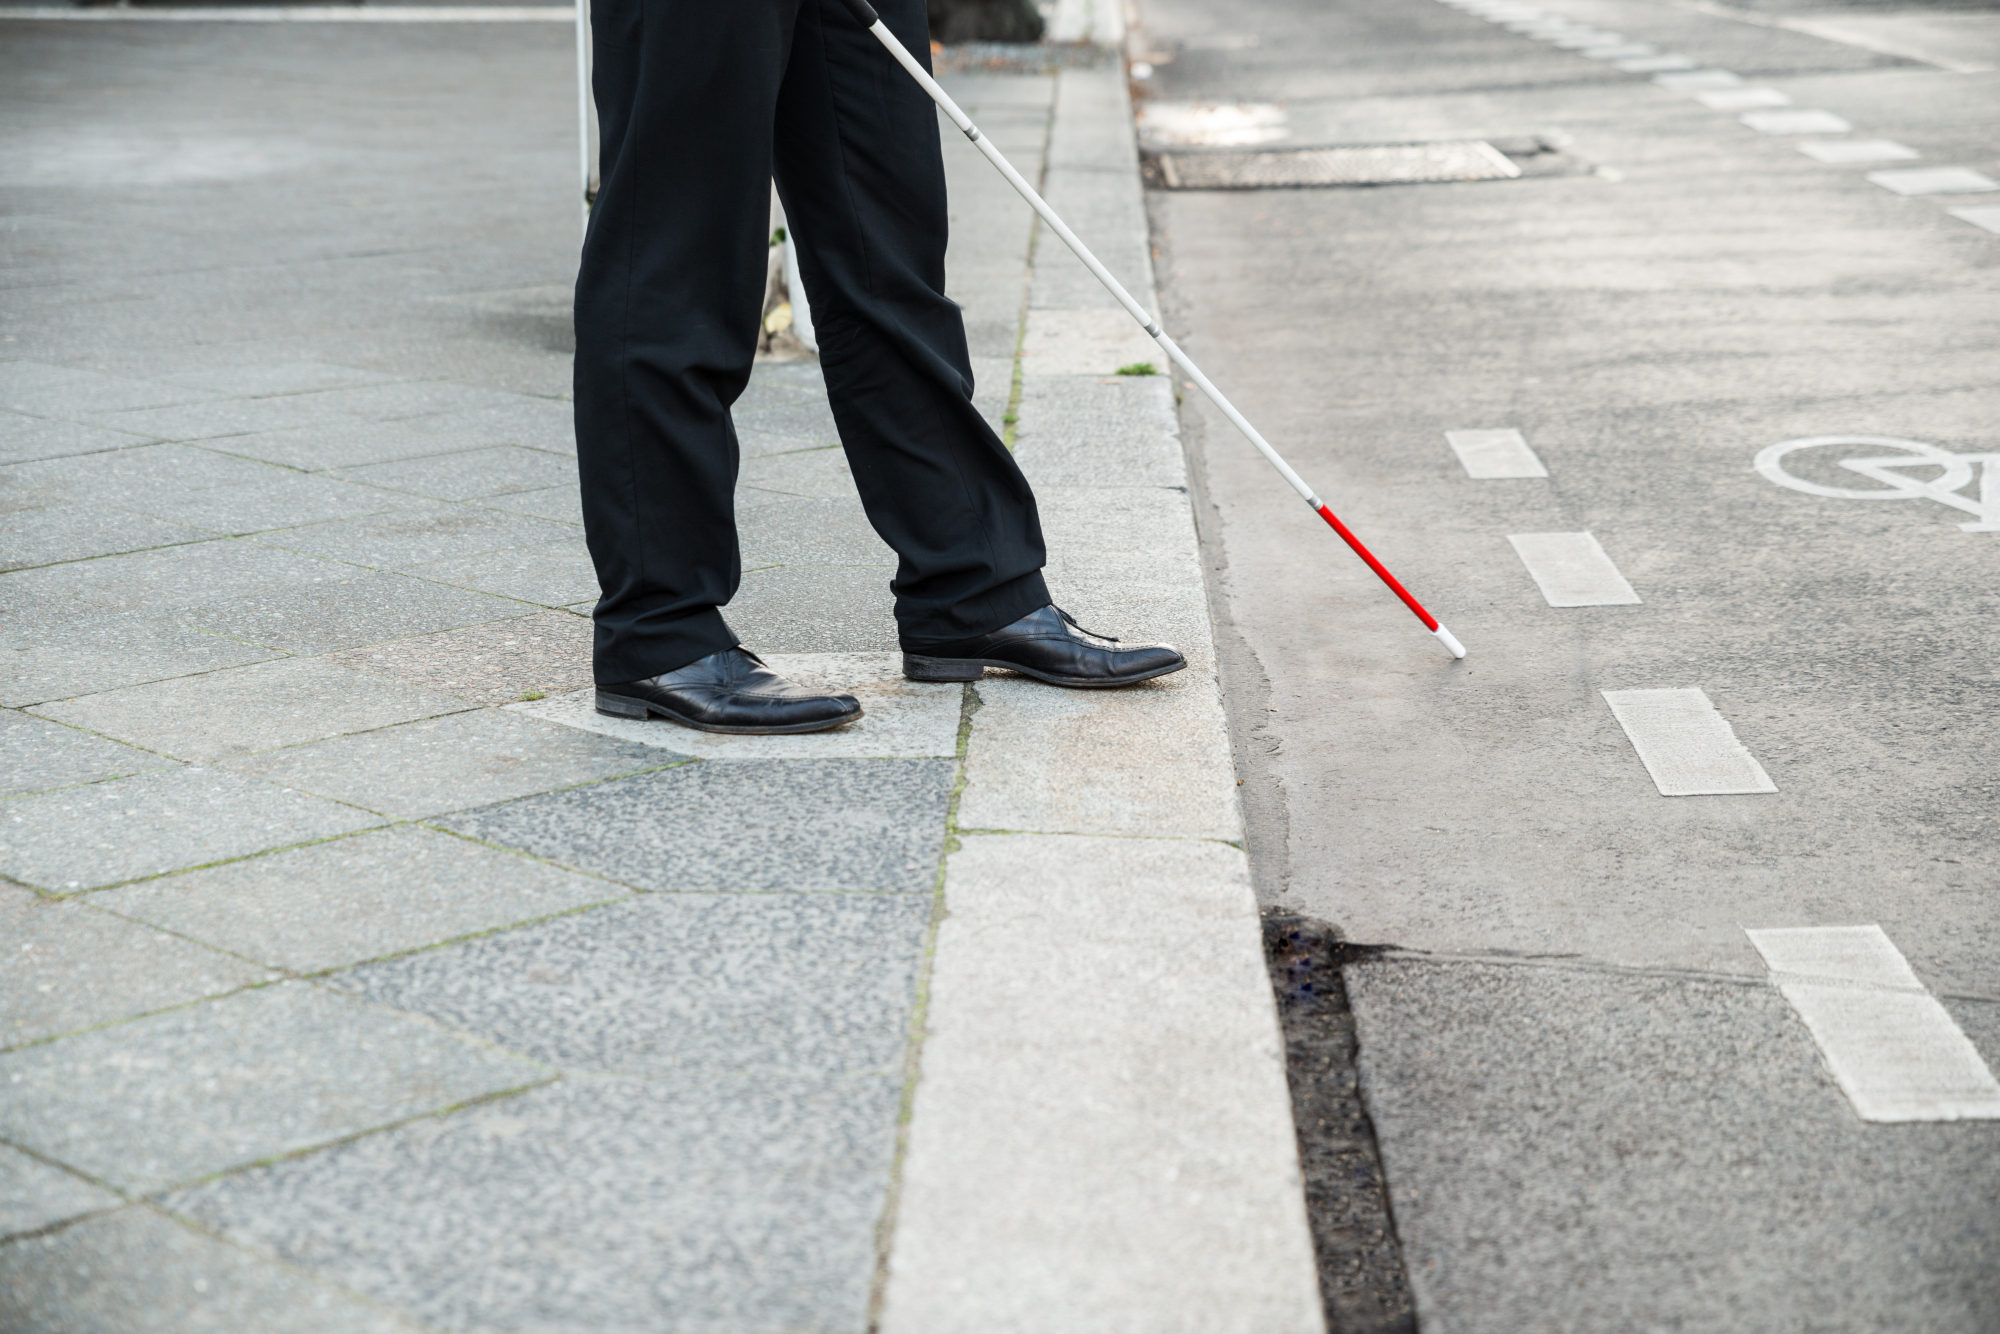 What is a white cane? Council of the Blind asking community to